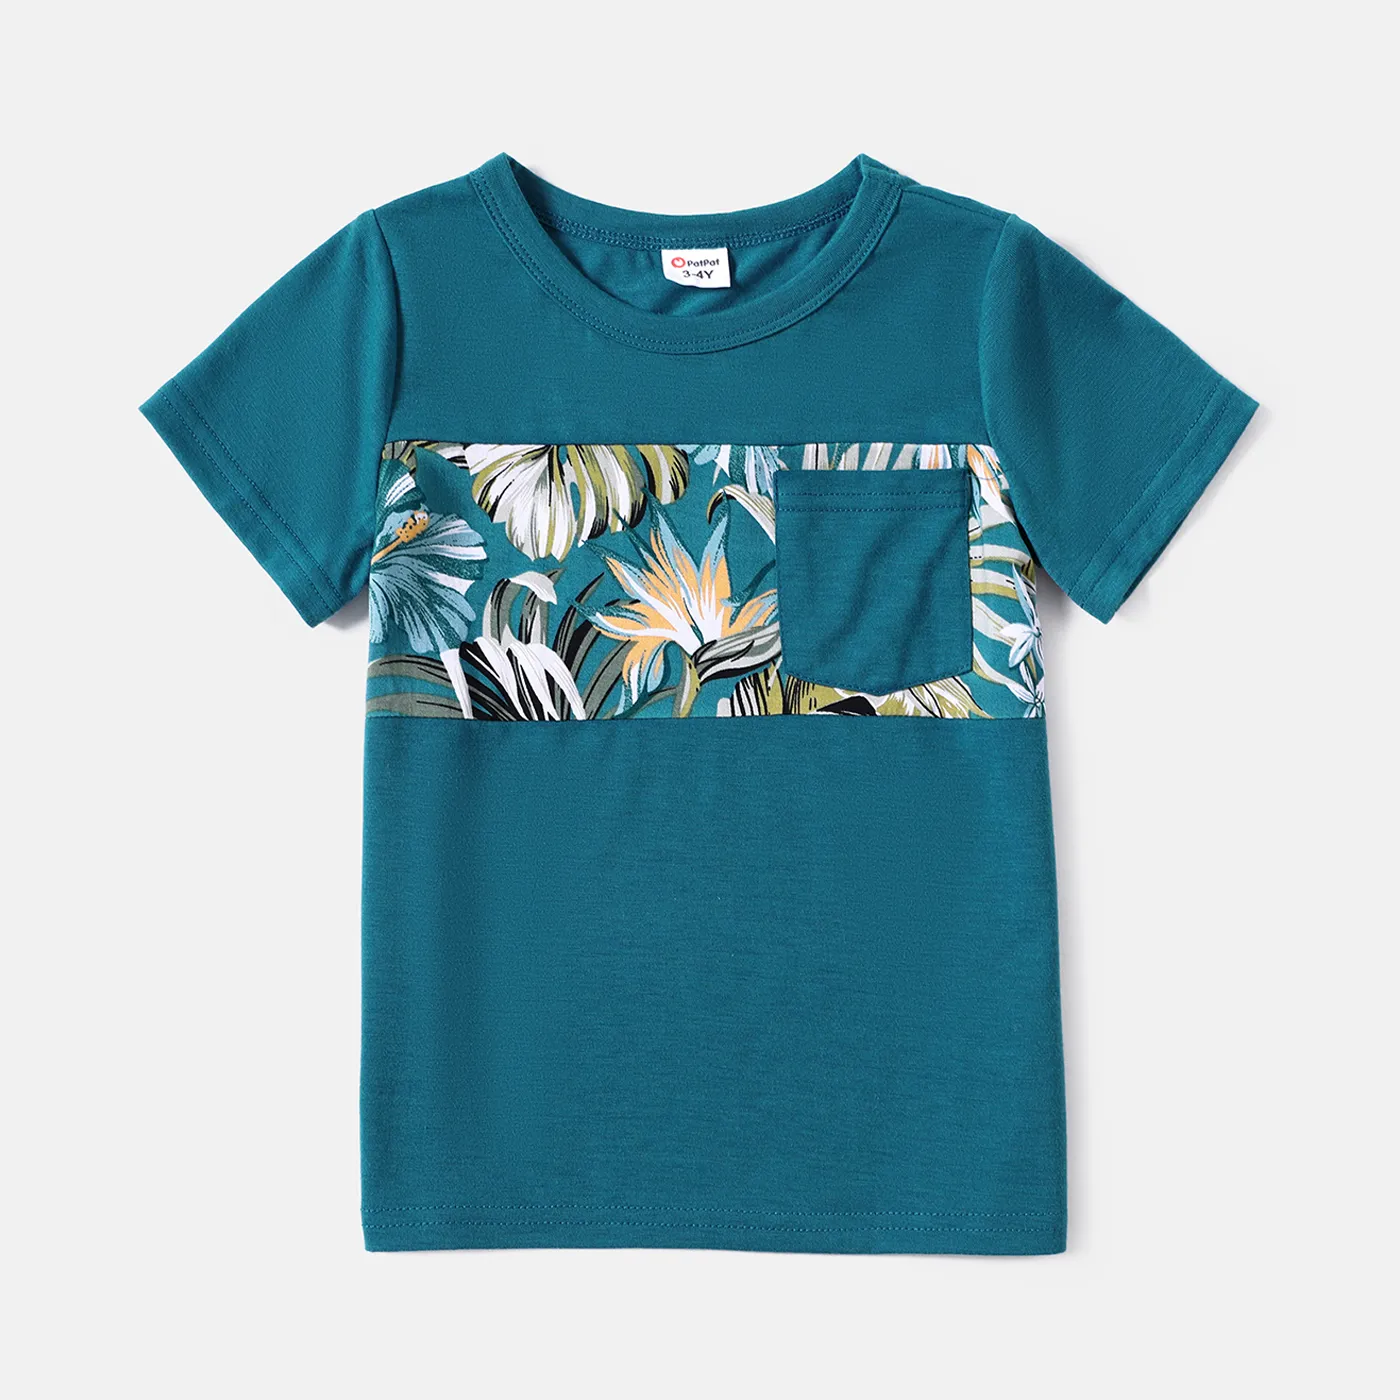 Family Matching 95% Cotton Colorblock T-shirts And Allover Plant Print Flutter-sleeve Belted Dresses Sets